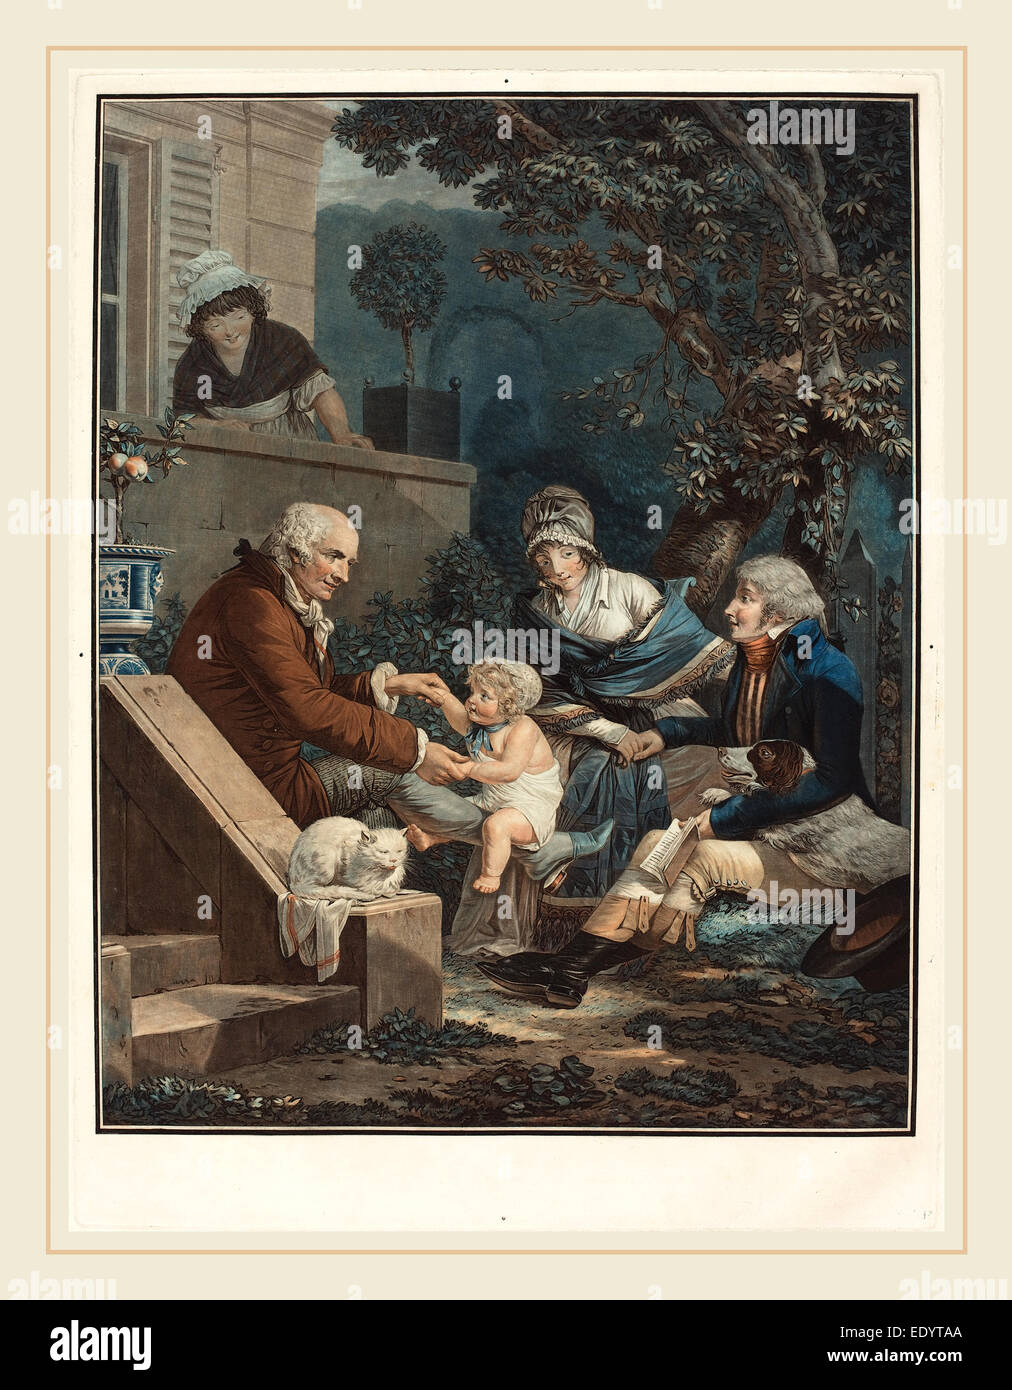 Philibert-Louis Debucourt, French (1755-1832), Les Plaisirs paternels (Paternal Pleasures), c. 1797, etching and wash manner Stock Photo